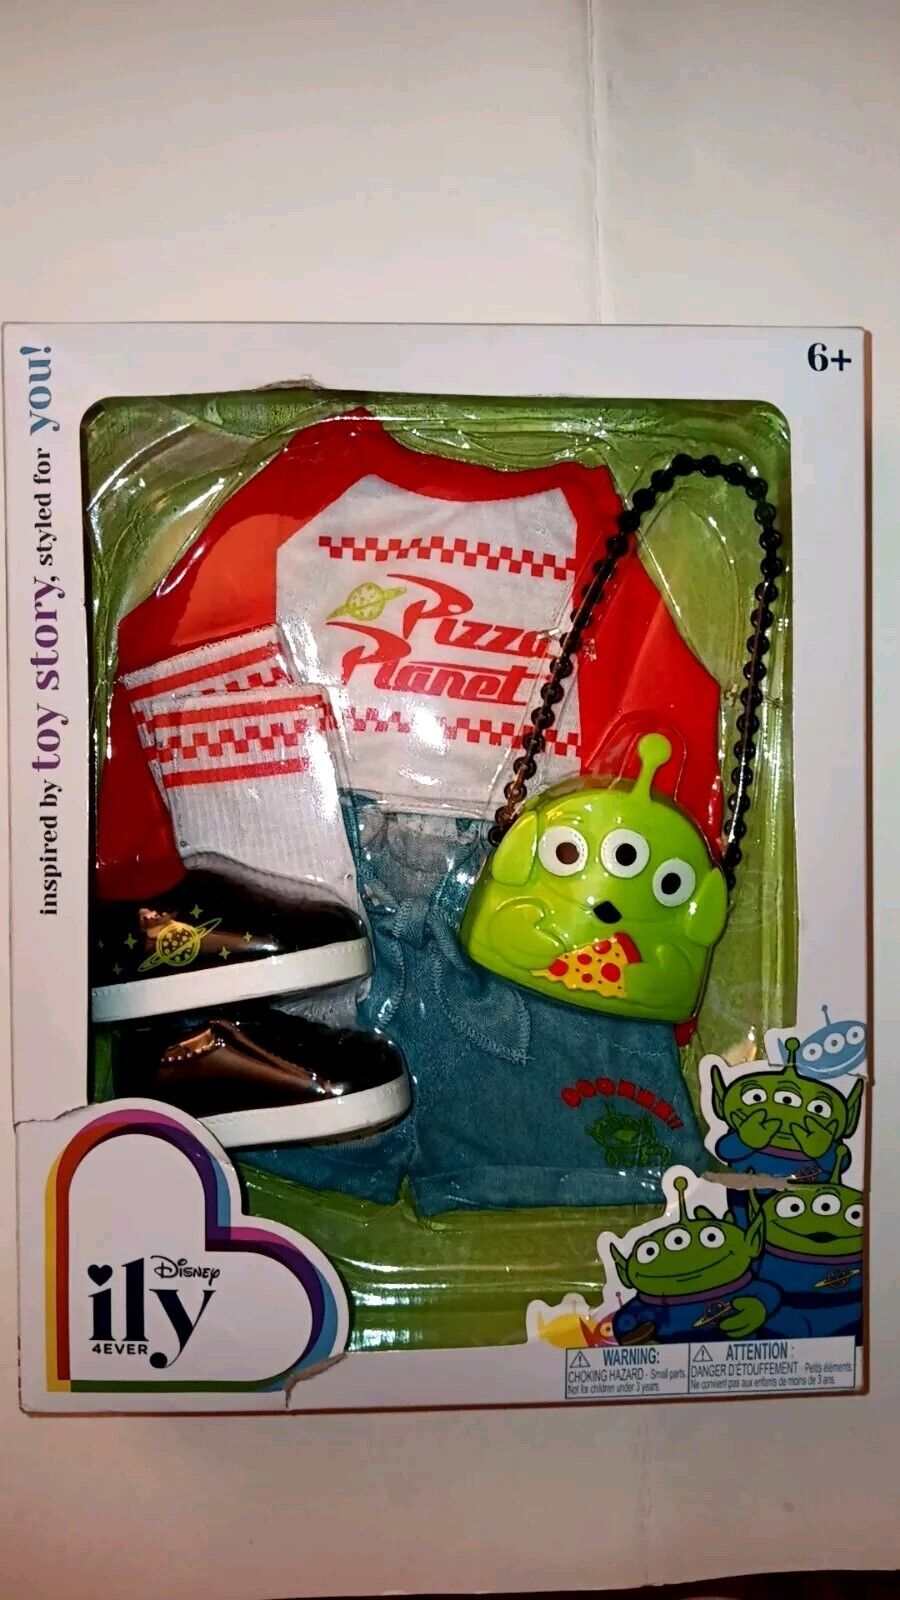 Disney ily 4EVER Doll Fashion Pack Inspired by Toy Story Pizza Planet Box Damage